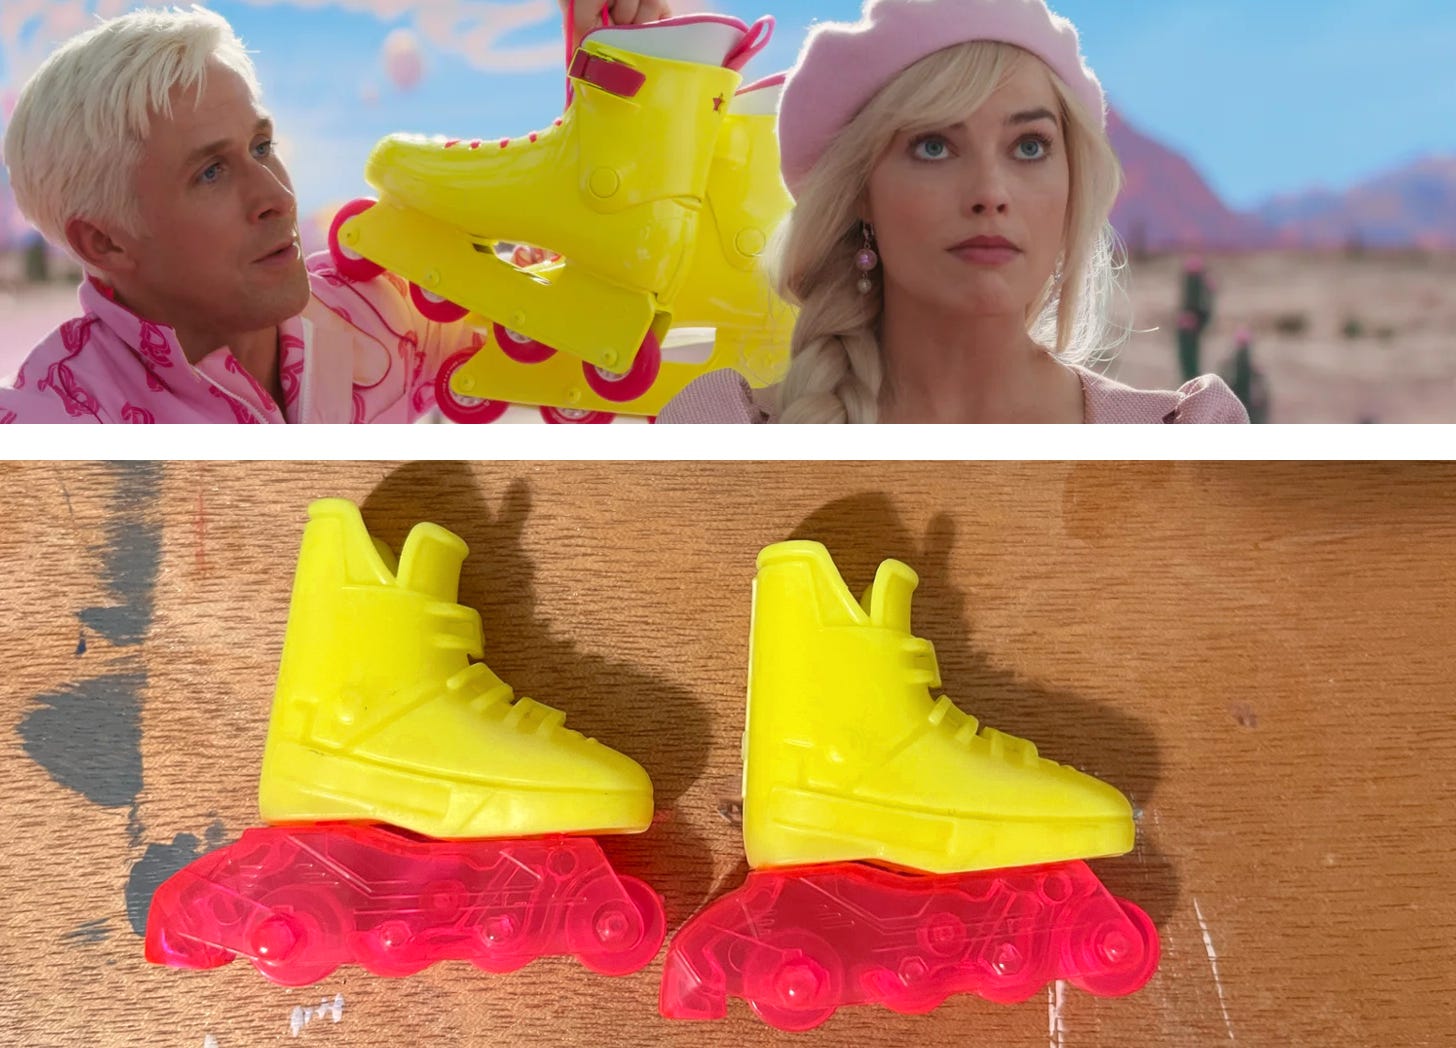 Top shows Ryan Gosling as Ken holding yellow-and-pink rollerblades next to Margot Robbie as Barbie; bottom shows doll-sized yellow-and-pink rollerblades.